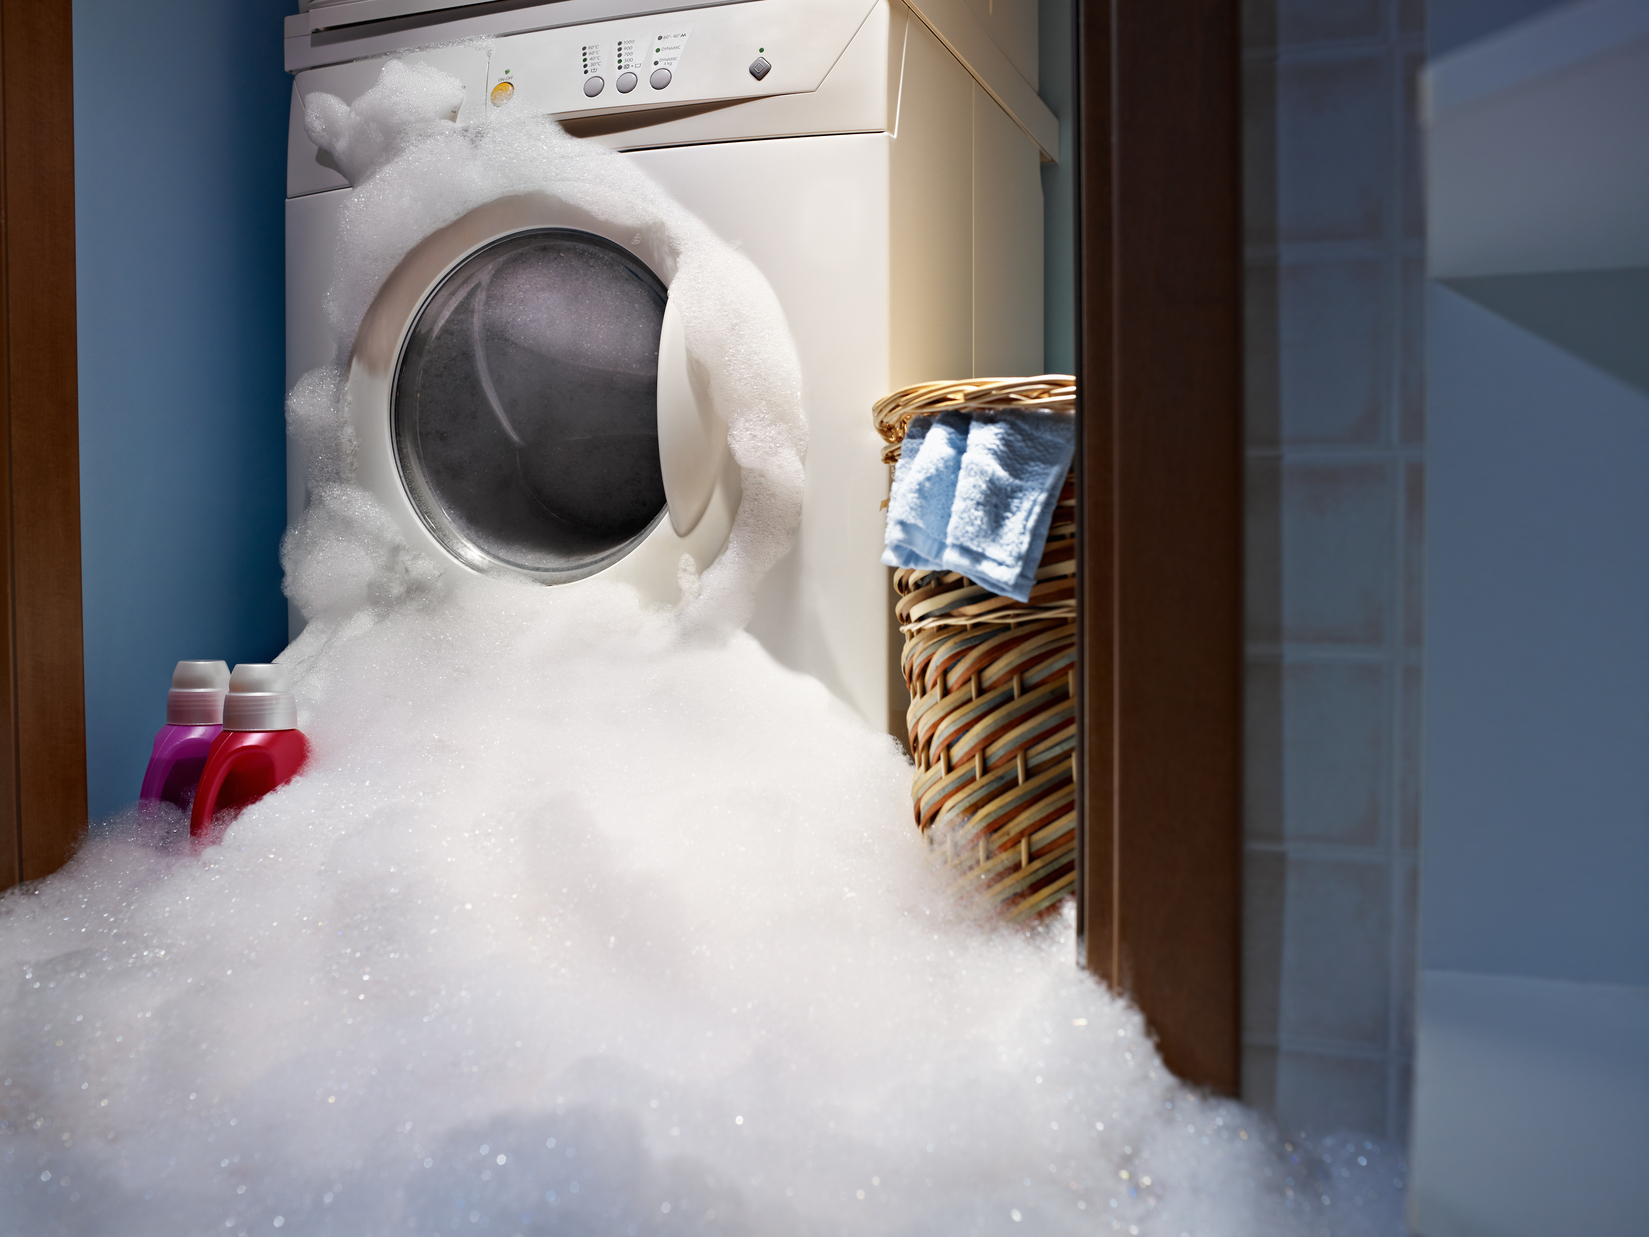 A malfunctioning front-loading washing machine with a large amount of suds pouring from the door